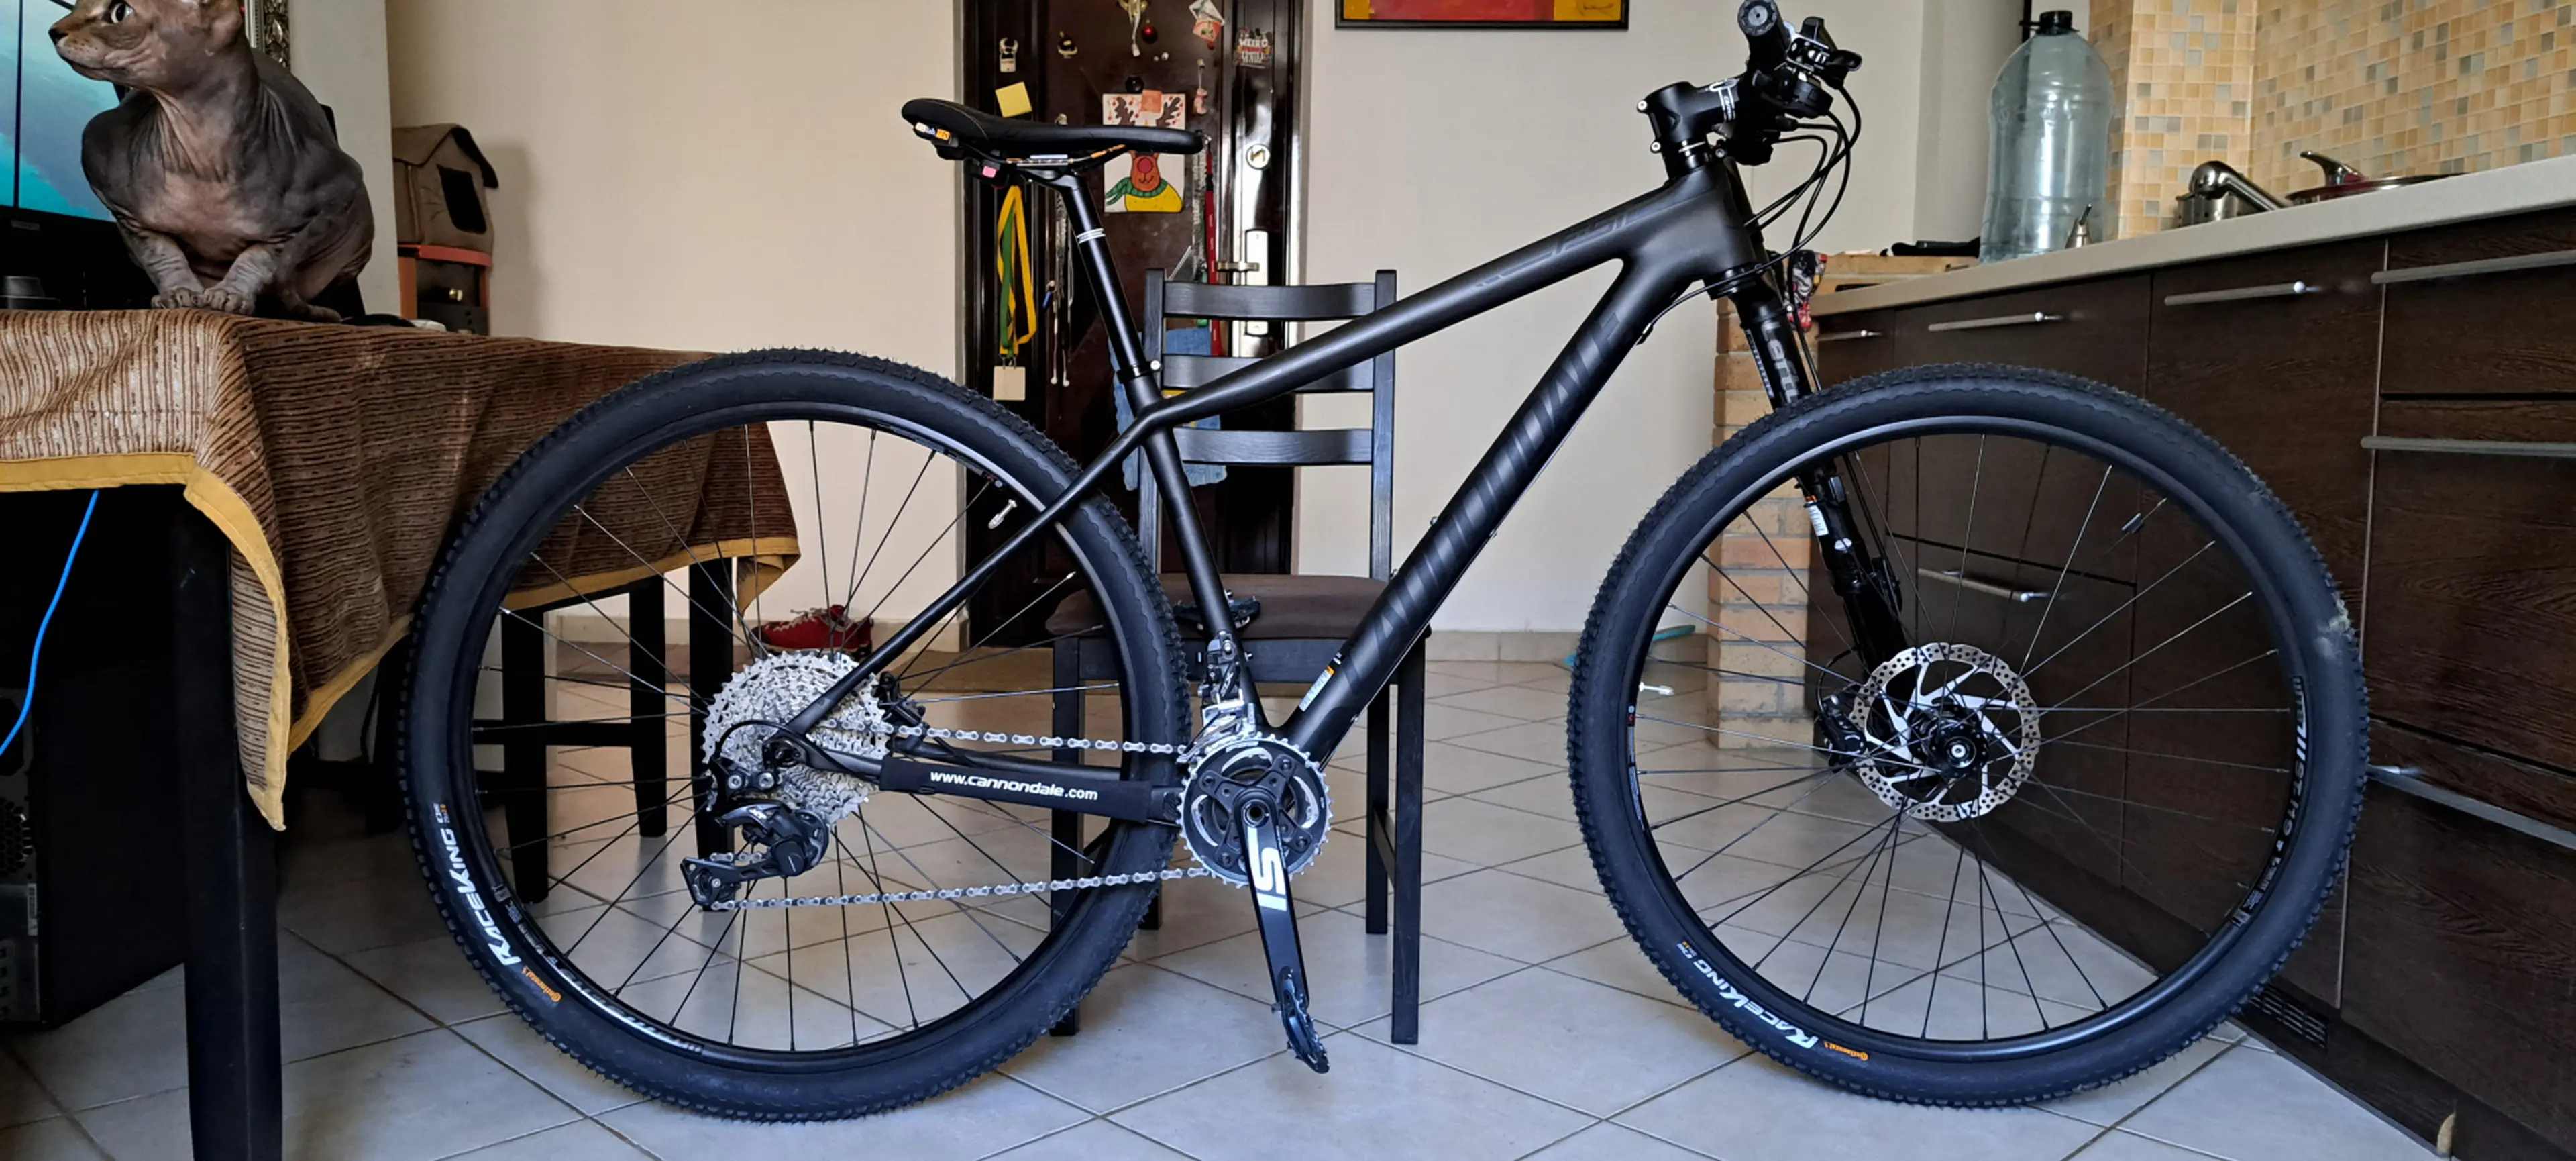 5. Bicicleta F-Si Cross Country Bikes - Cannondale